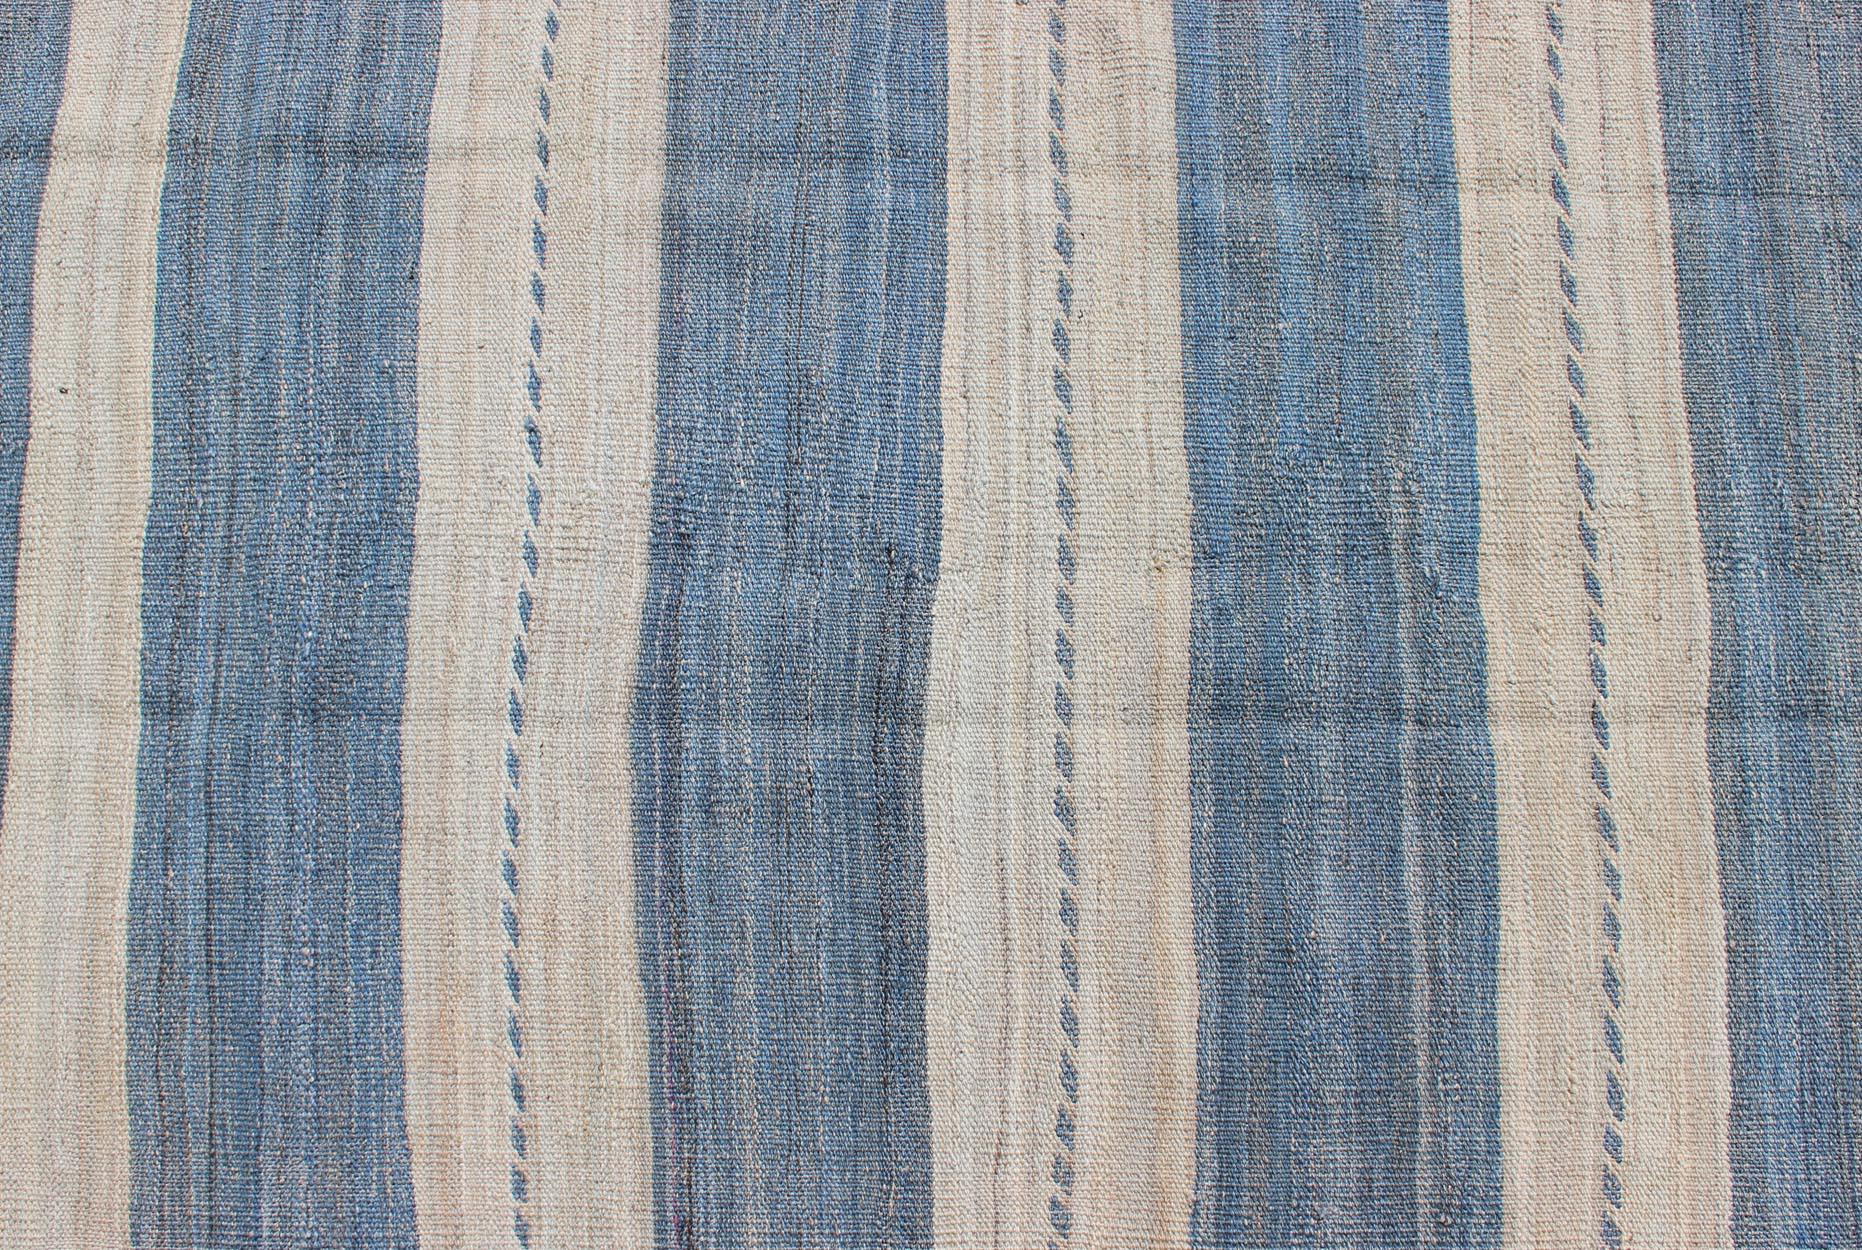 Hand-Knotted Flat-Weave Modern Kilim Rug with Stripes in Shades of Blue and Ivory